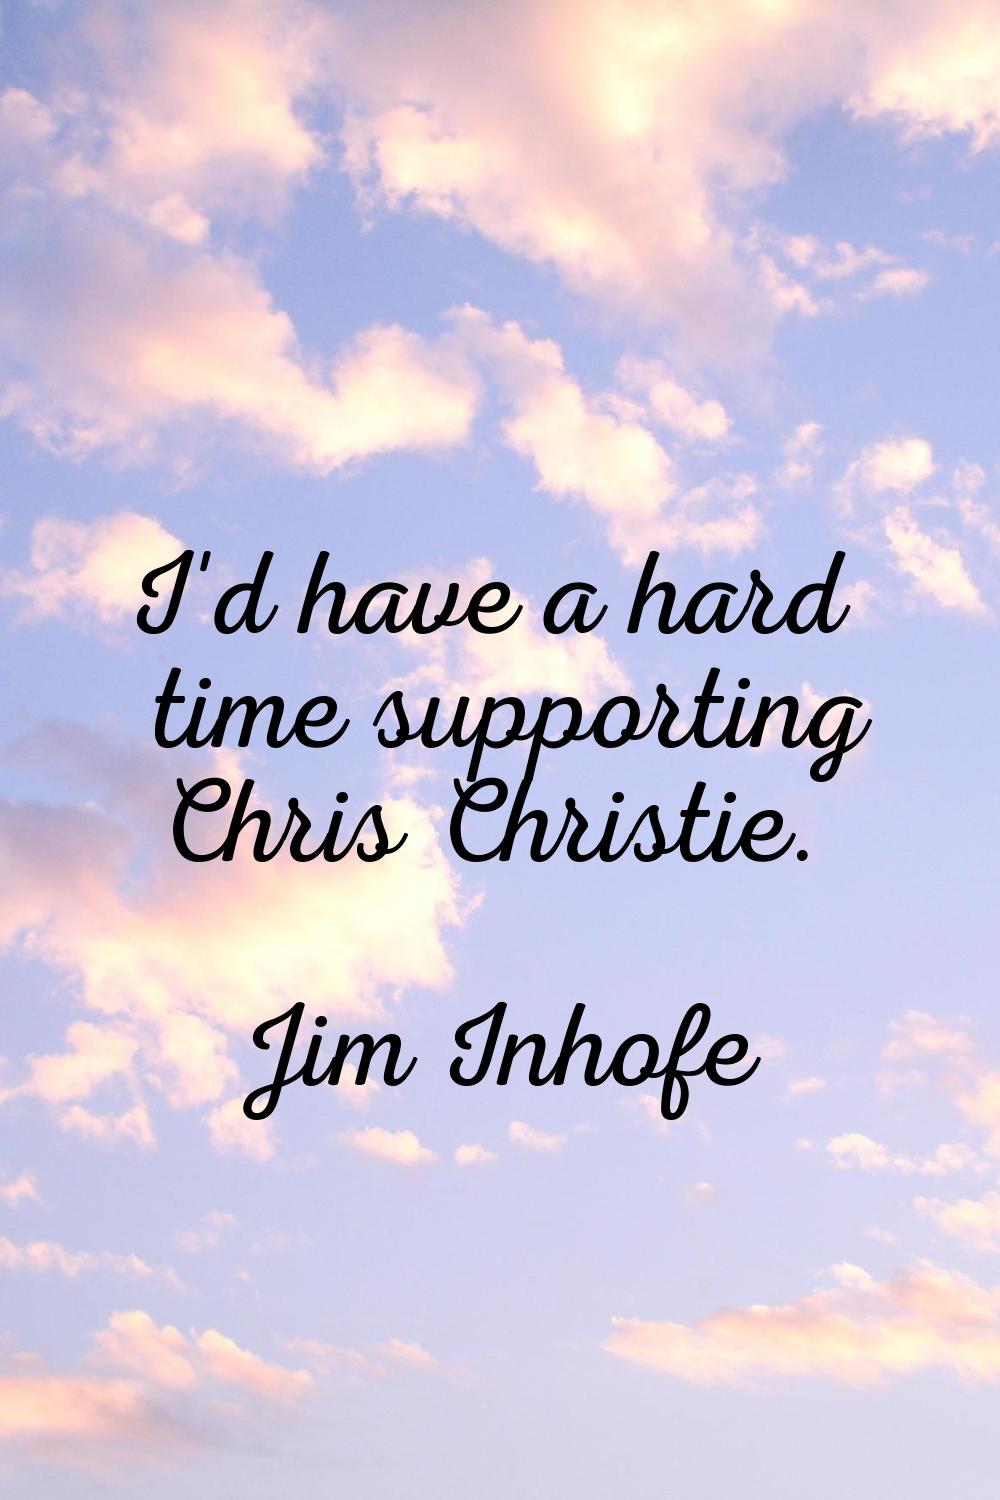 I'd have a hard time supporting Chris Christie.